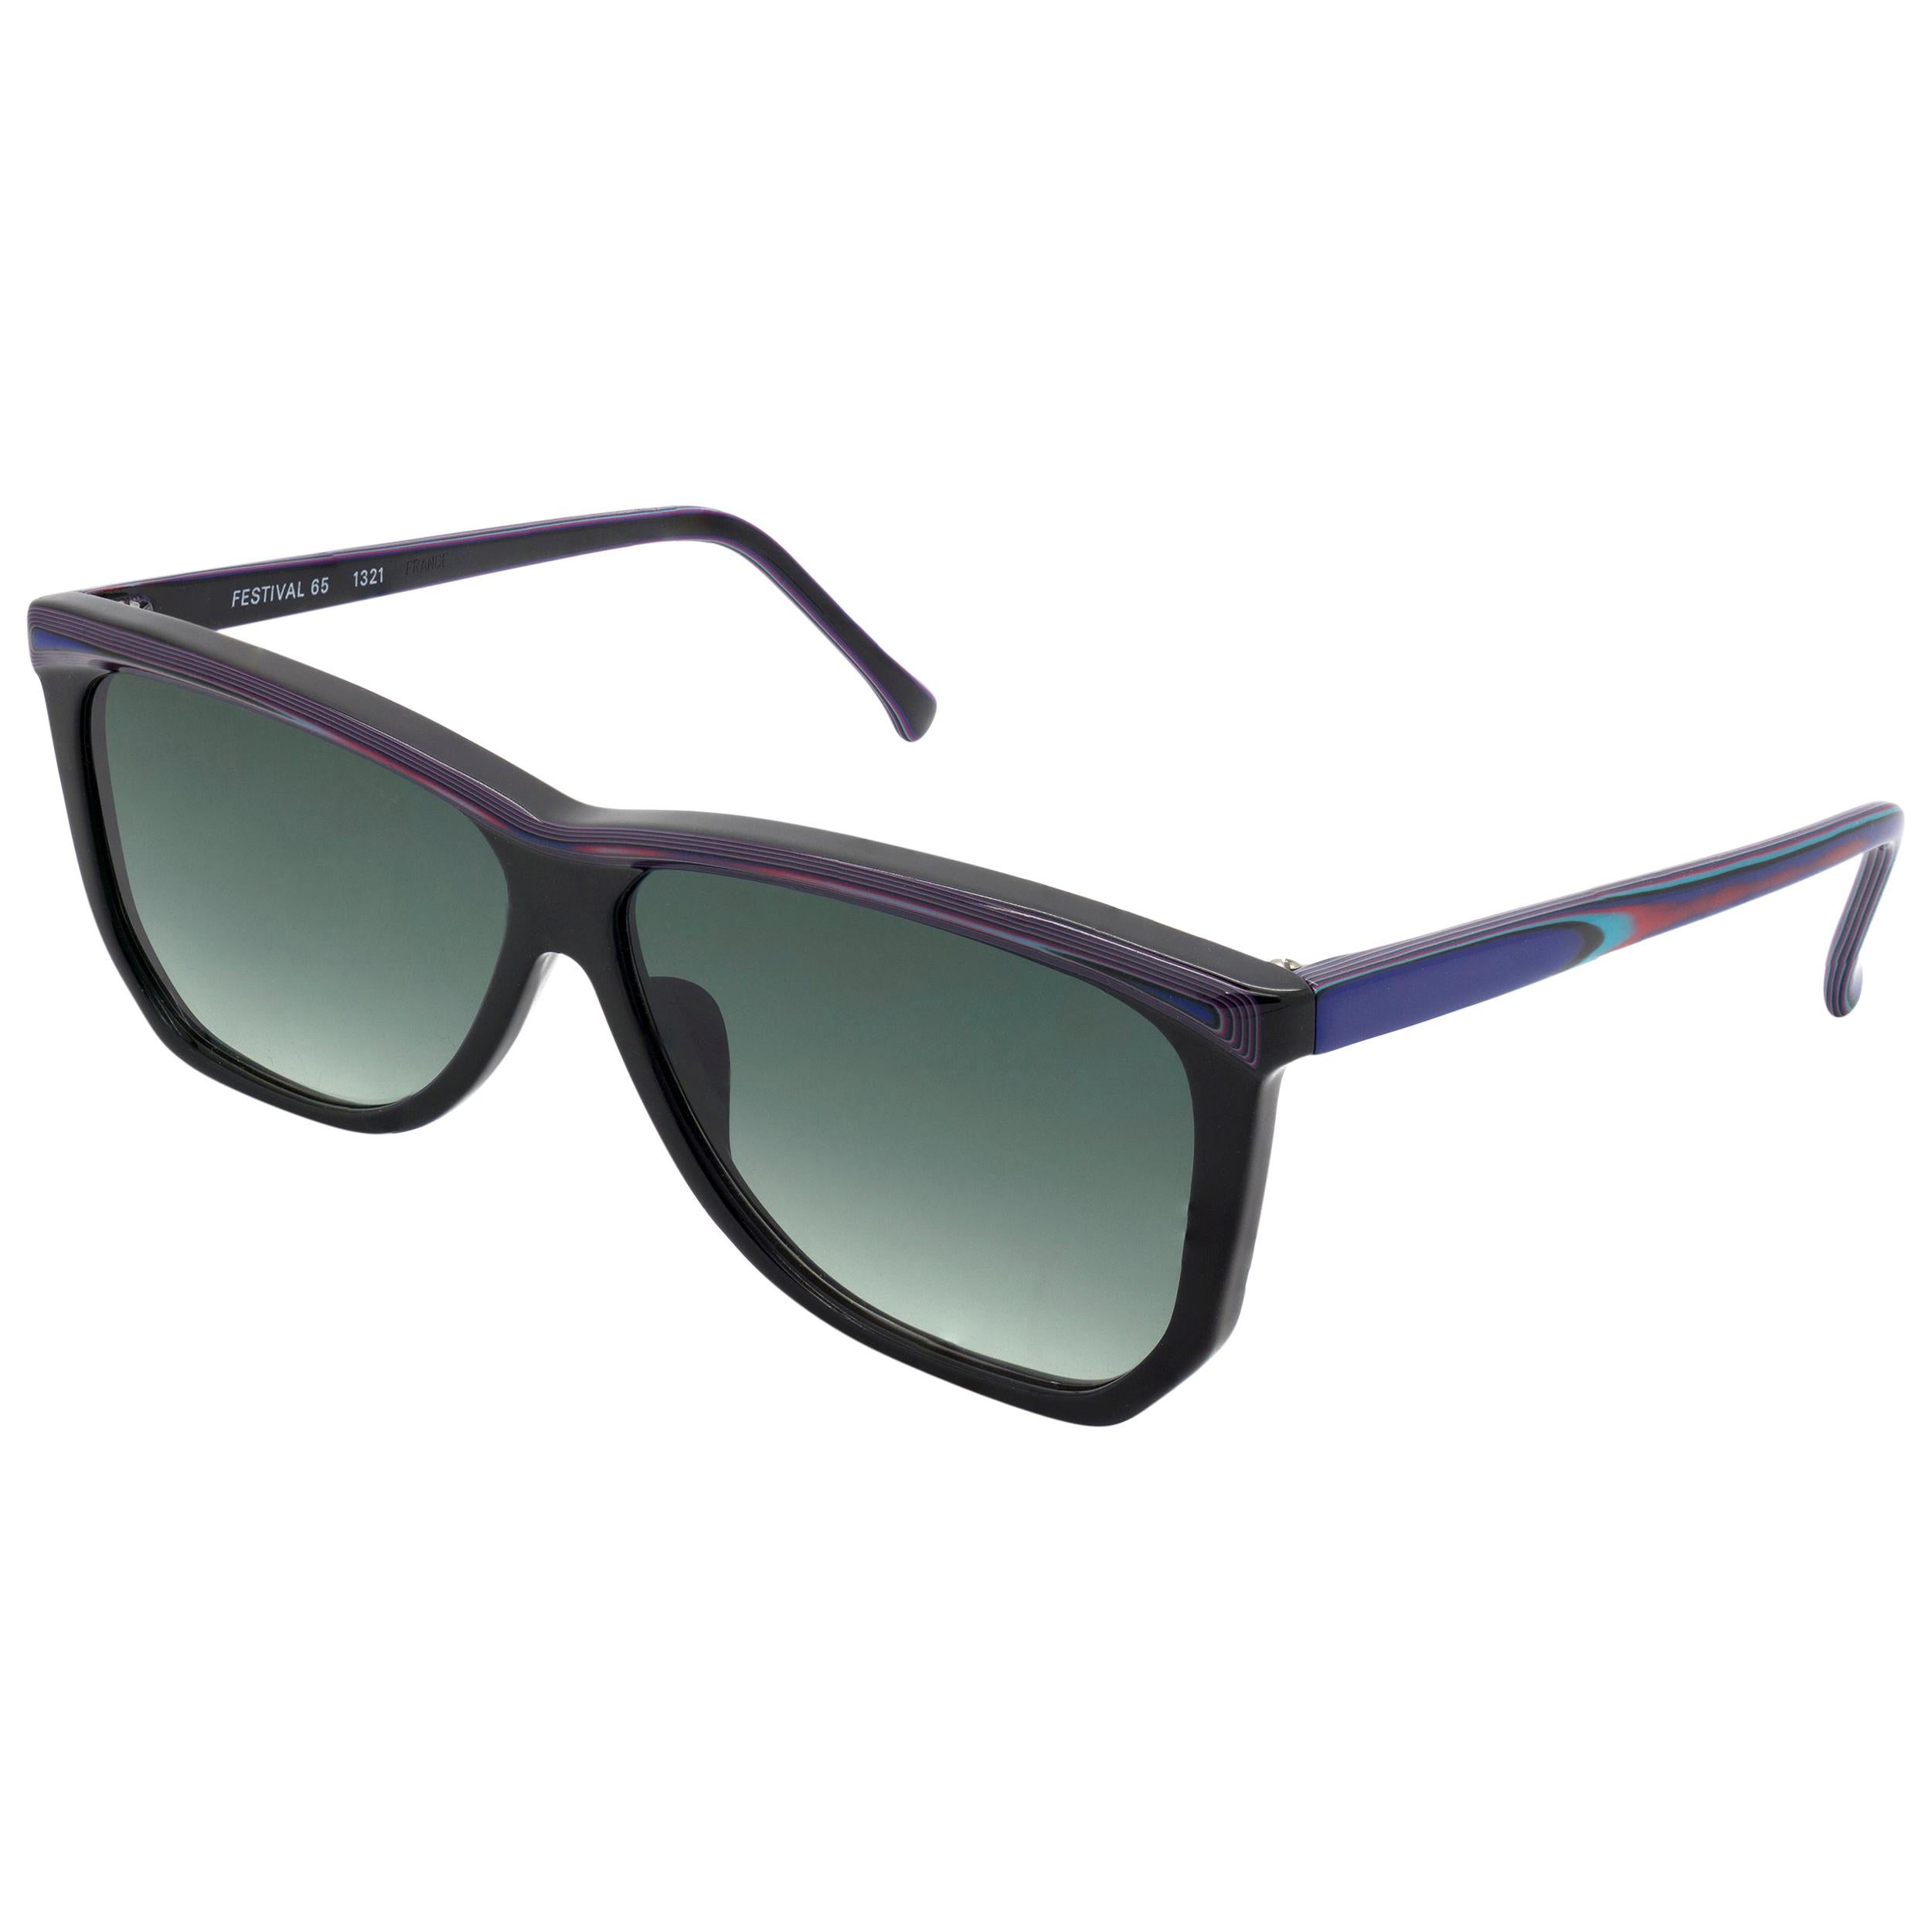 France square sunglasses by Argos